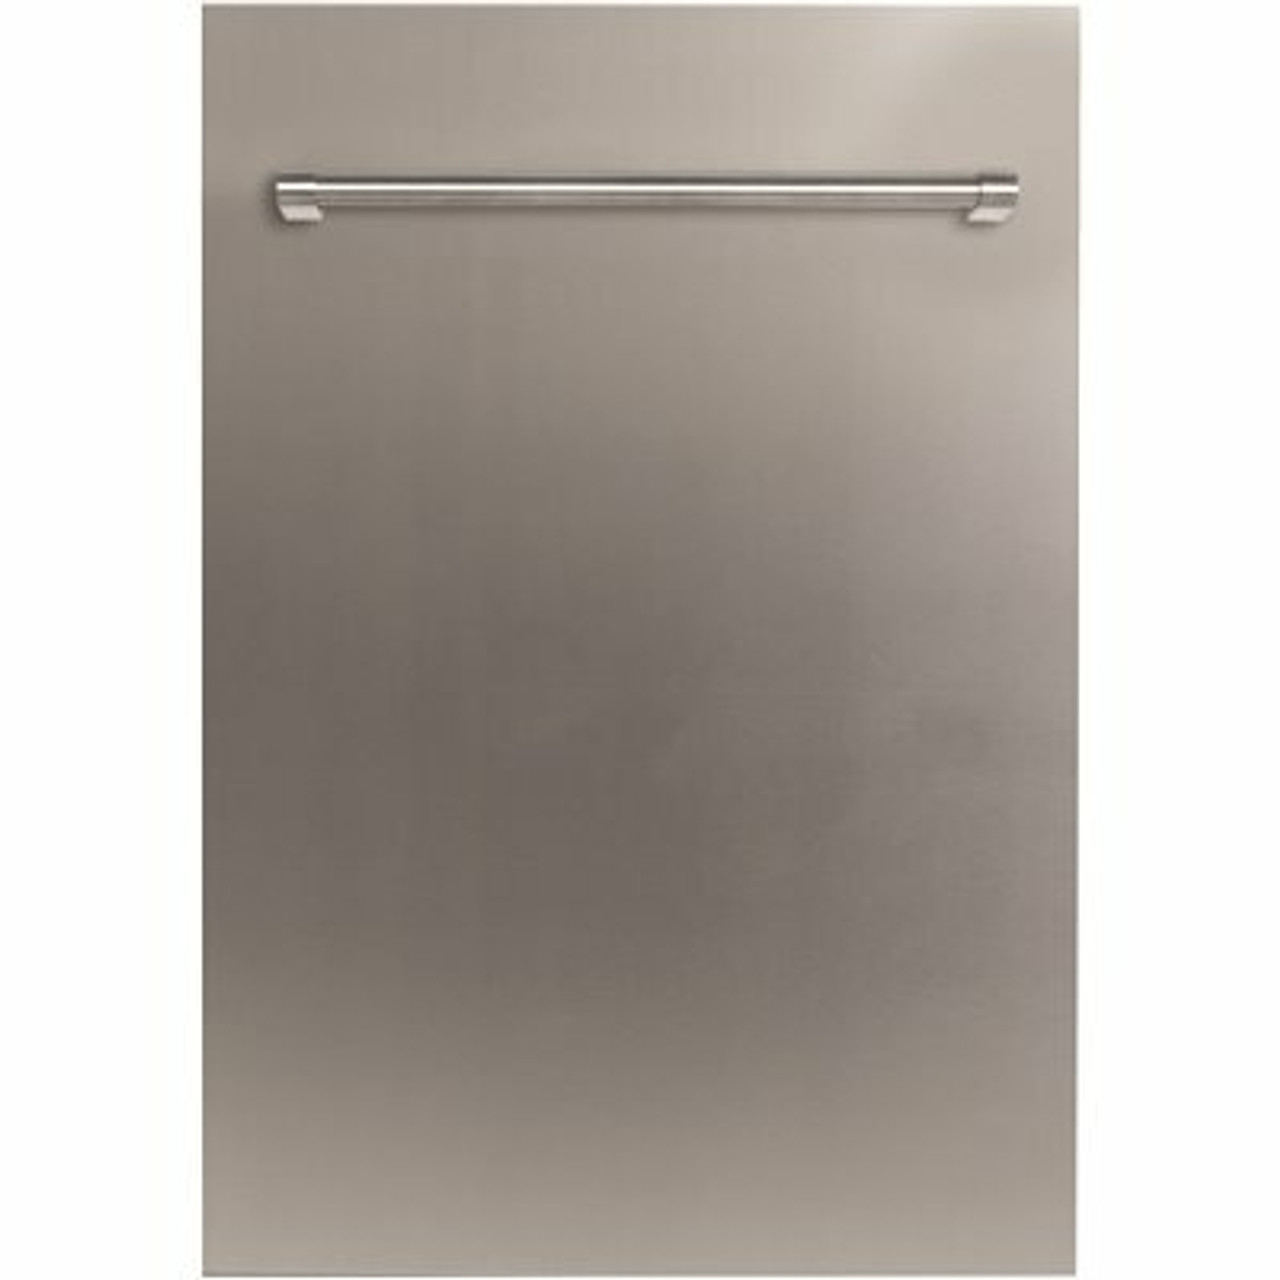 Zline 18 In. Compact Stainless Steel Top Control Dishwasher With Stainless Steel Tub And Traditional Style Handle, 40Dba